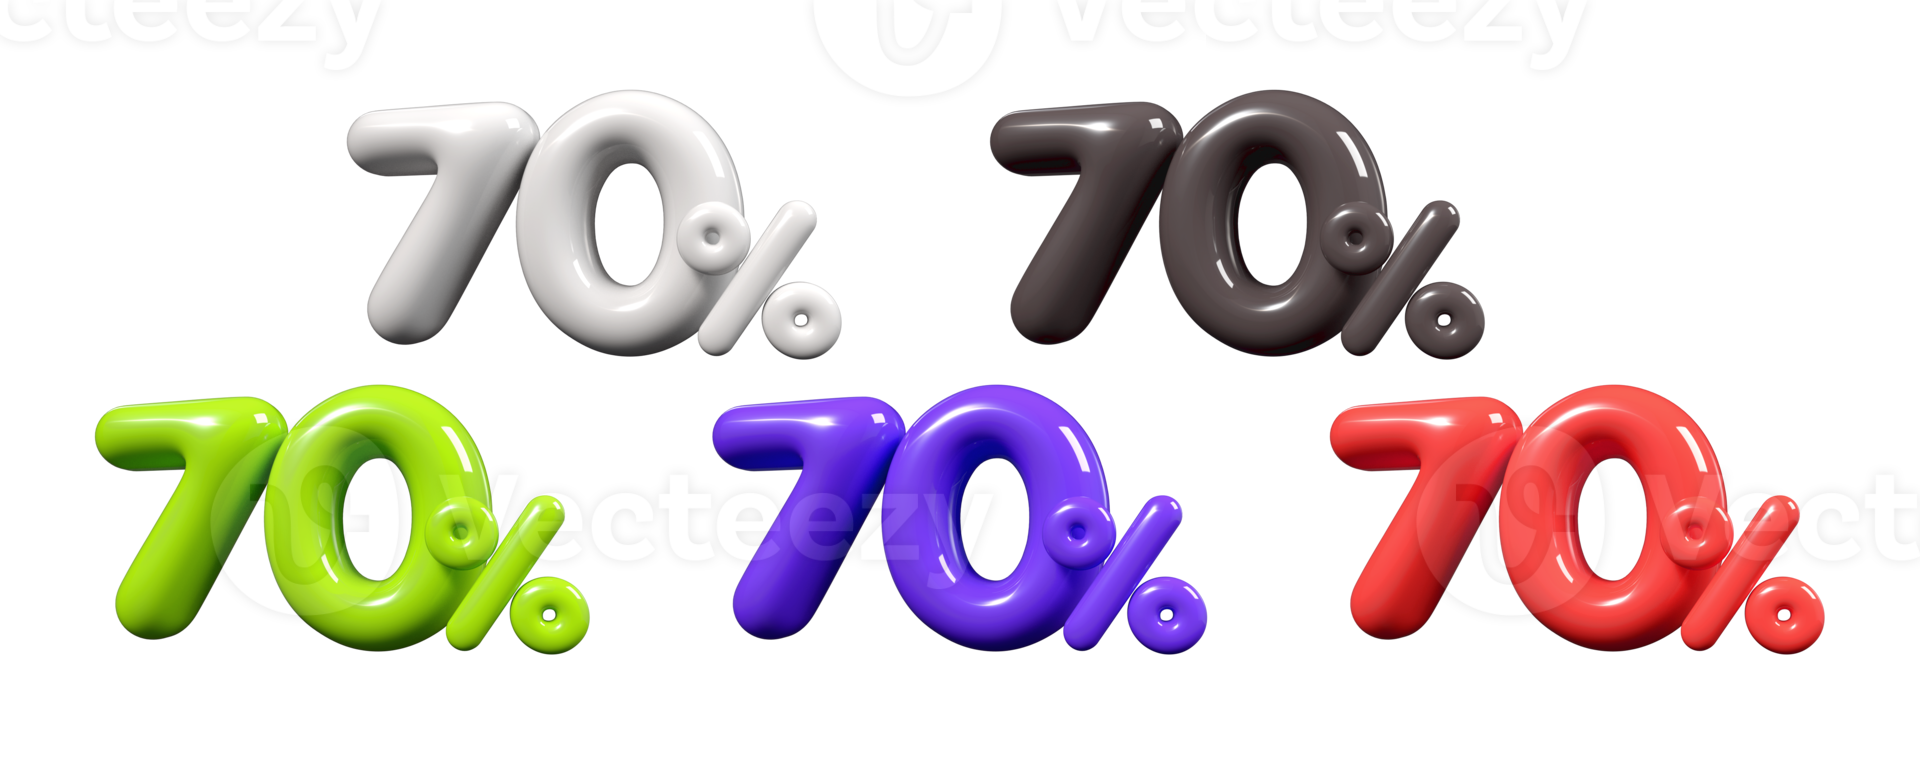 Discount bundle tag sale Trendy 3D number 70 percent element for promoting sales, clearing inventory, and boosting revenue png